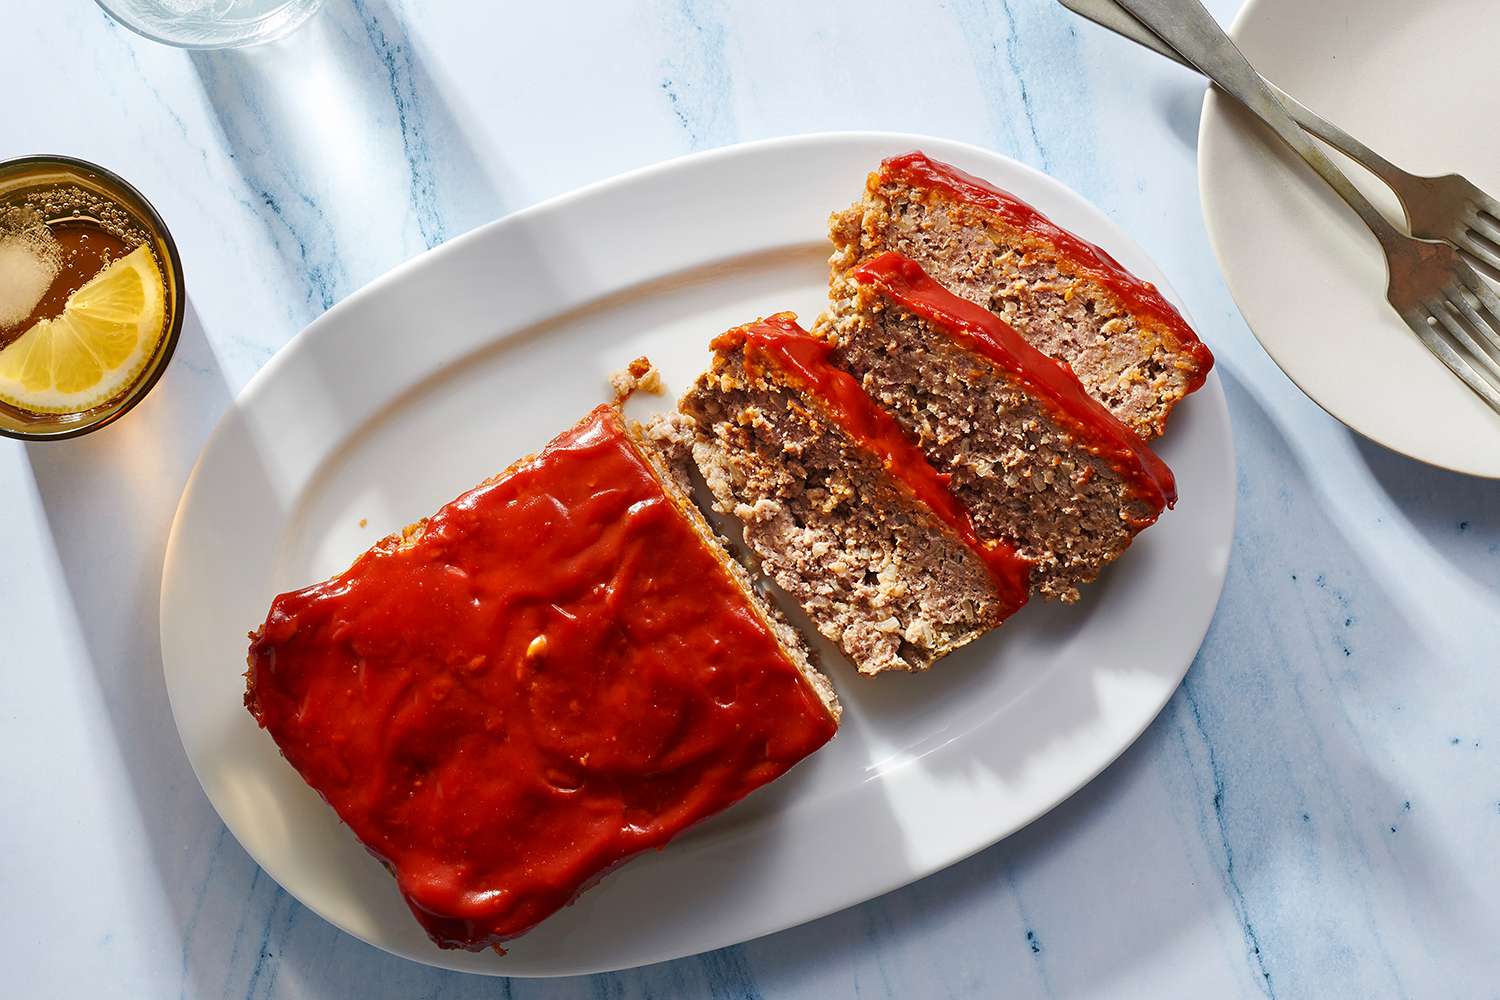 Partially sliced meatloaf with oatmeal topped with ketchup glaze on white serving platter